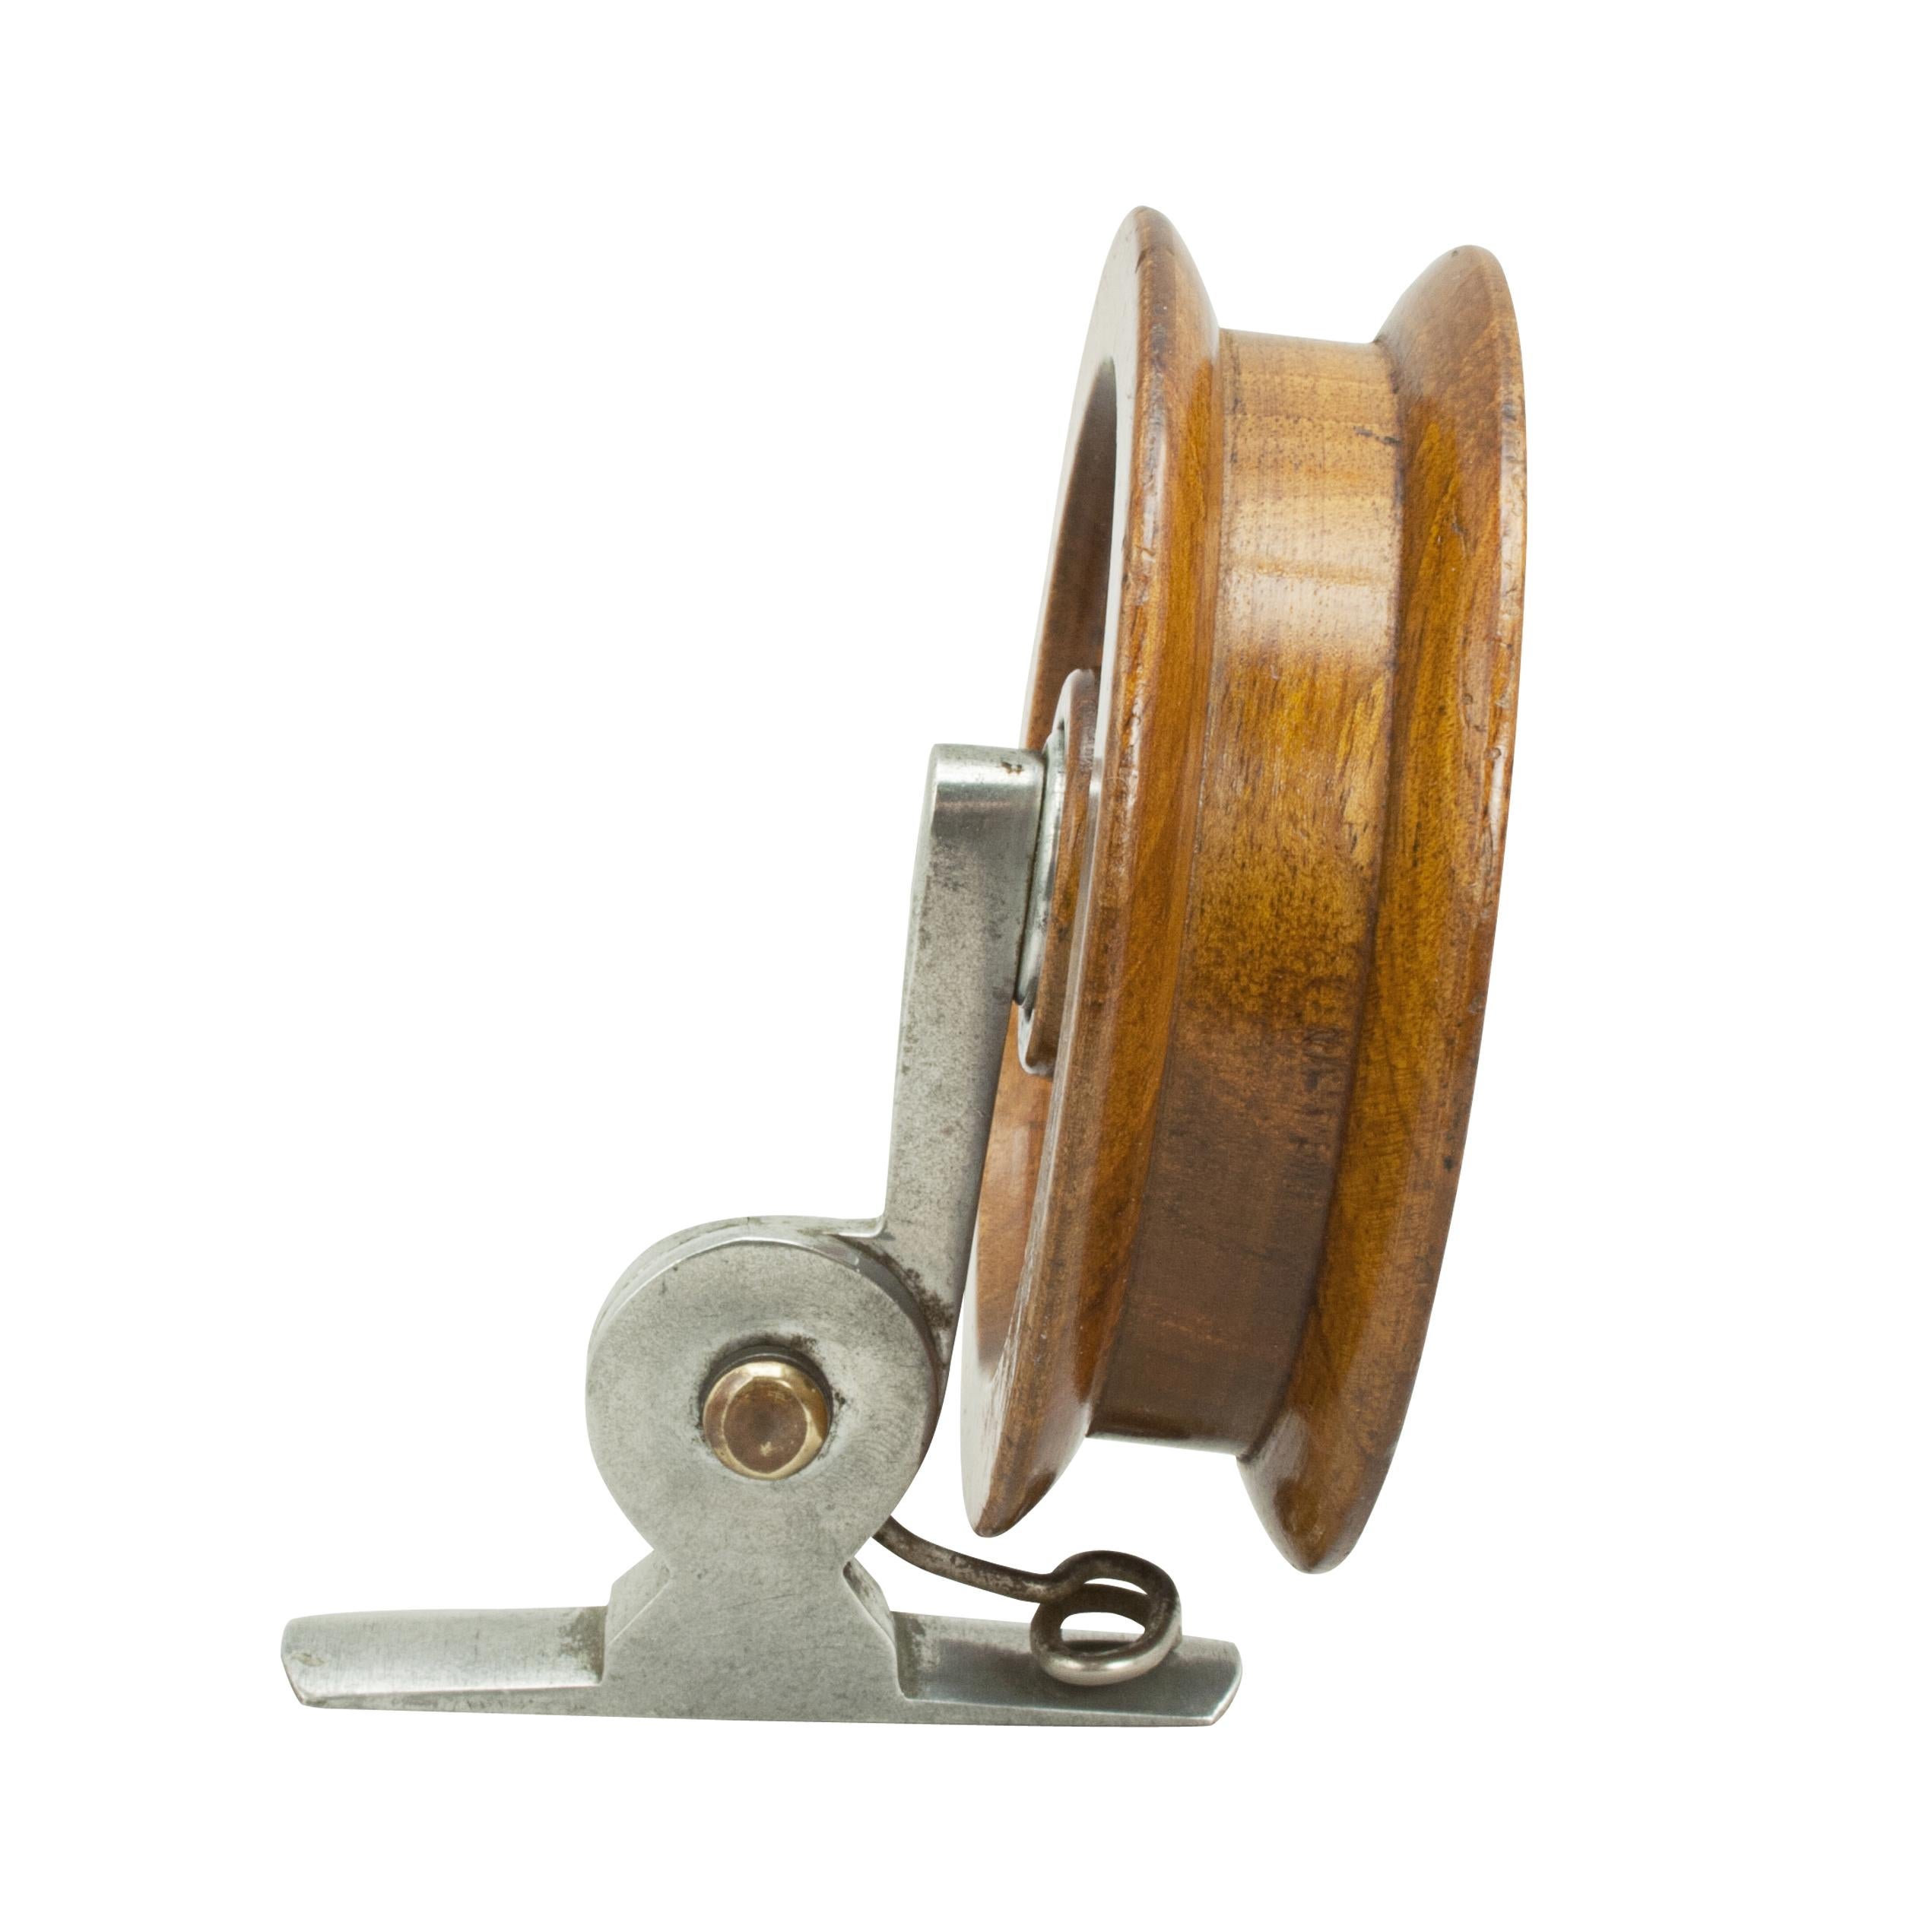 Brownie fishing reel by Millward. 1921 Patent sidecasting reel made from wood with aluminium and brass fittings. The reel stamped 'Millward The Brownie Pat. No. 193277/21'. The back stamped, 'Made in England'
This is a rare reel but the handle is